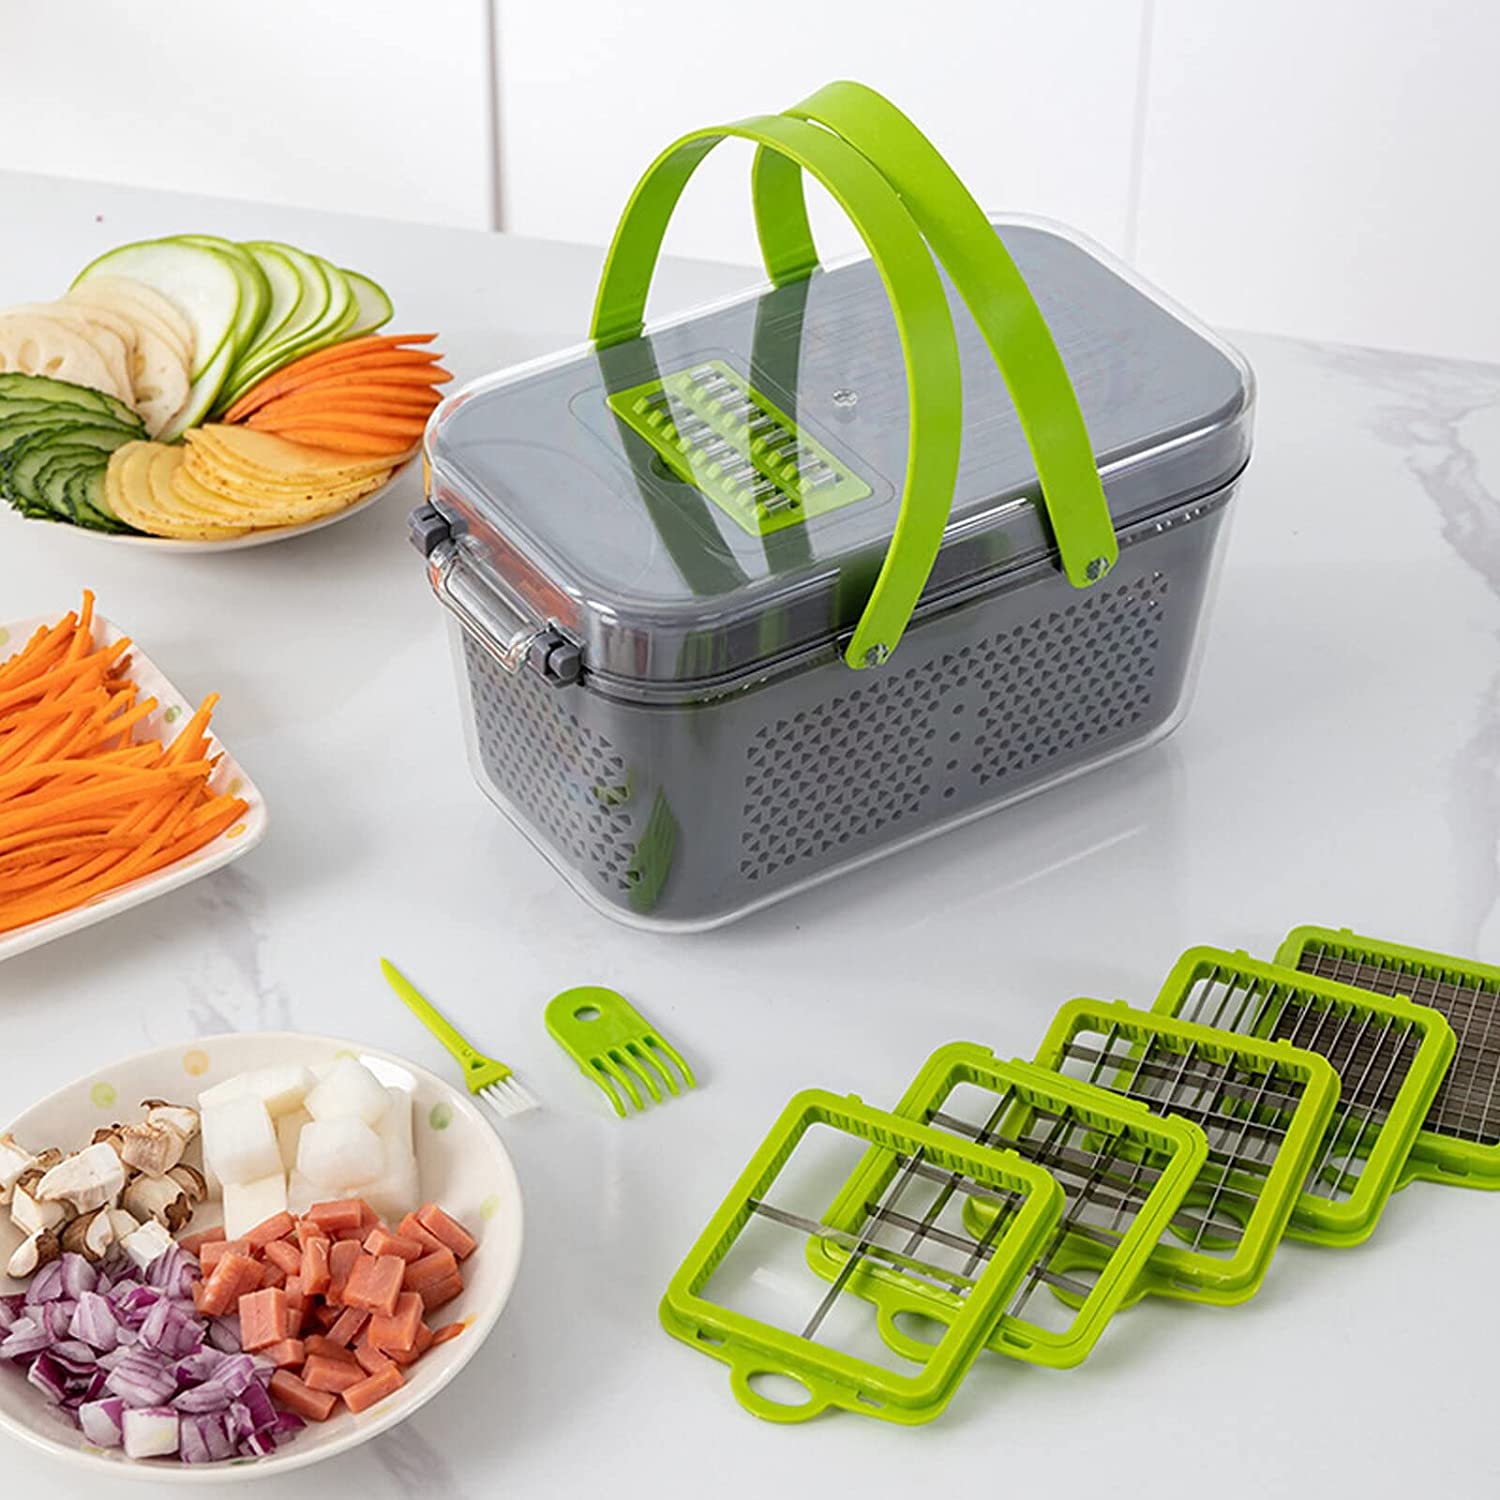 Vegetable Chopper, Onion Chopper, Mandolin Slicer, Pro 20 in Professional  Food Chopper Multifunctional Vegetable Chopper  Slicer, Dicer, Adjustable Vegetable  Chopper with Container